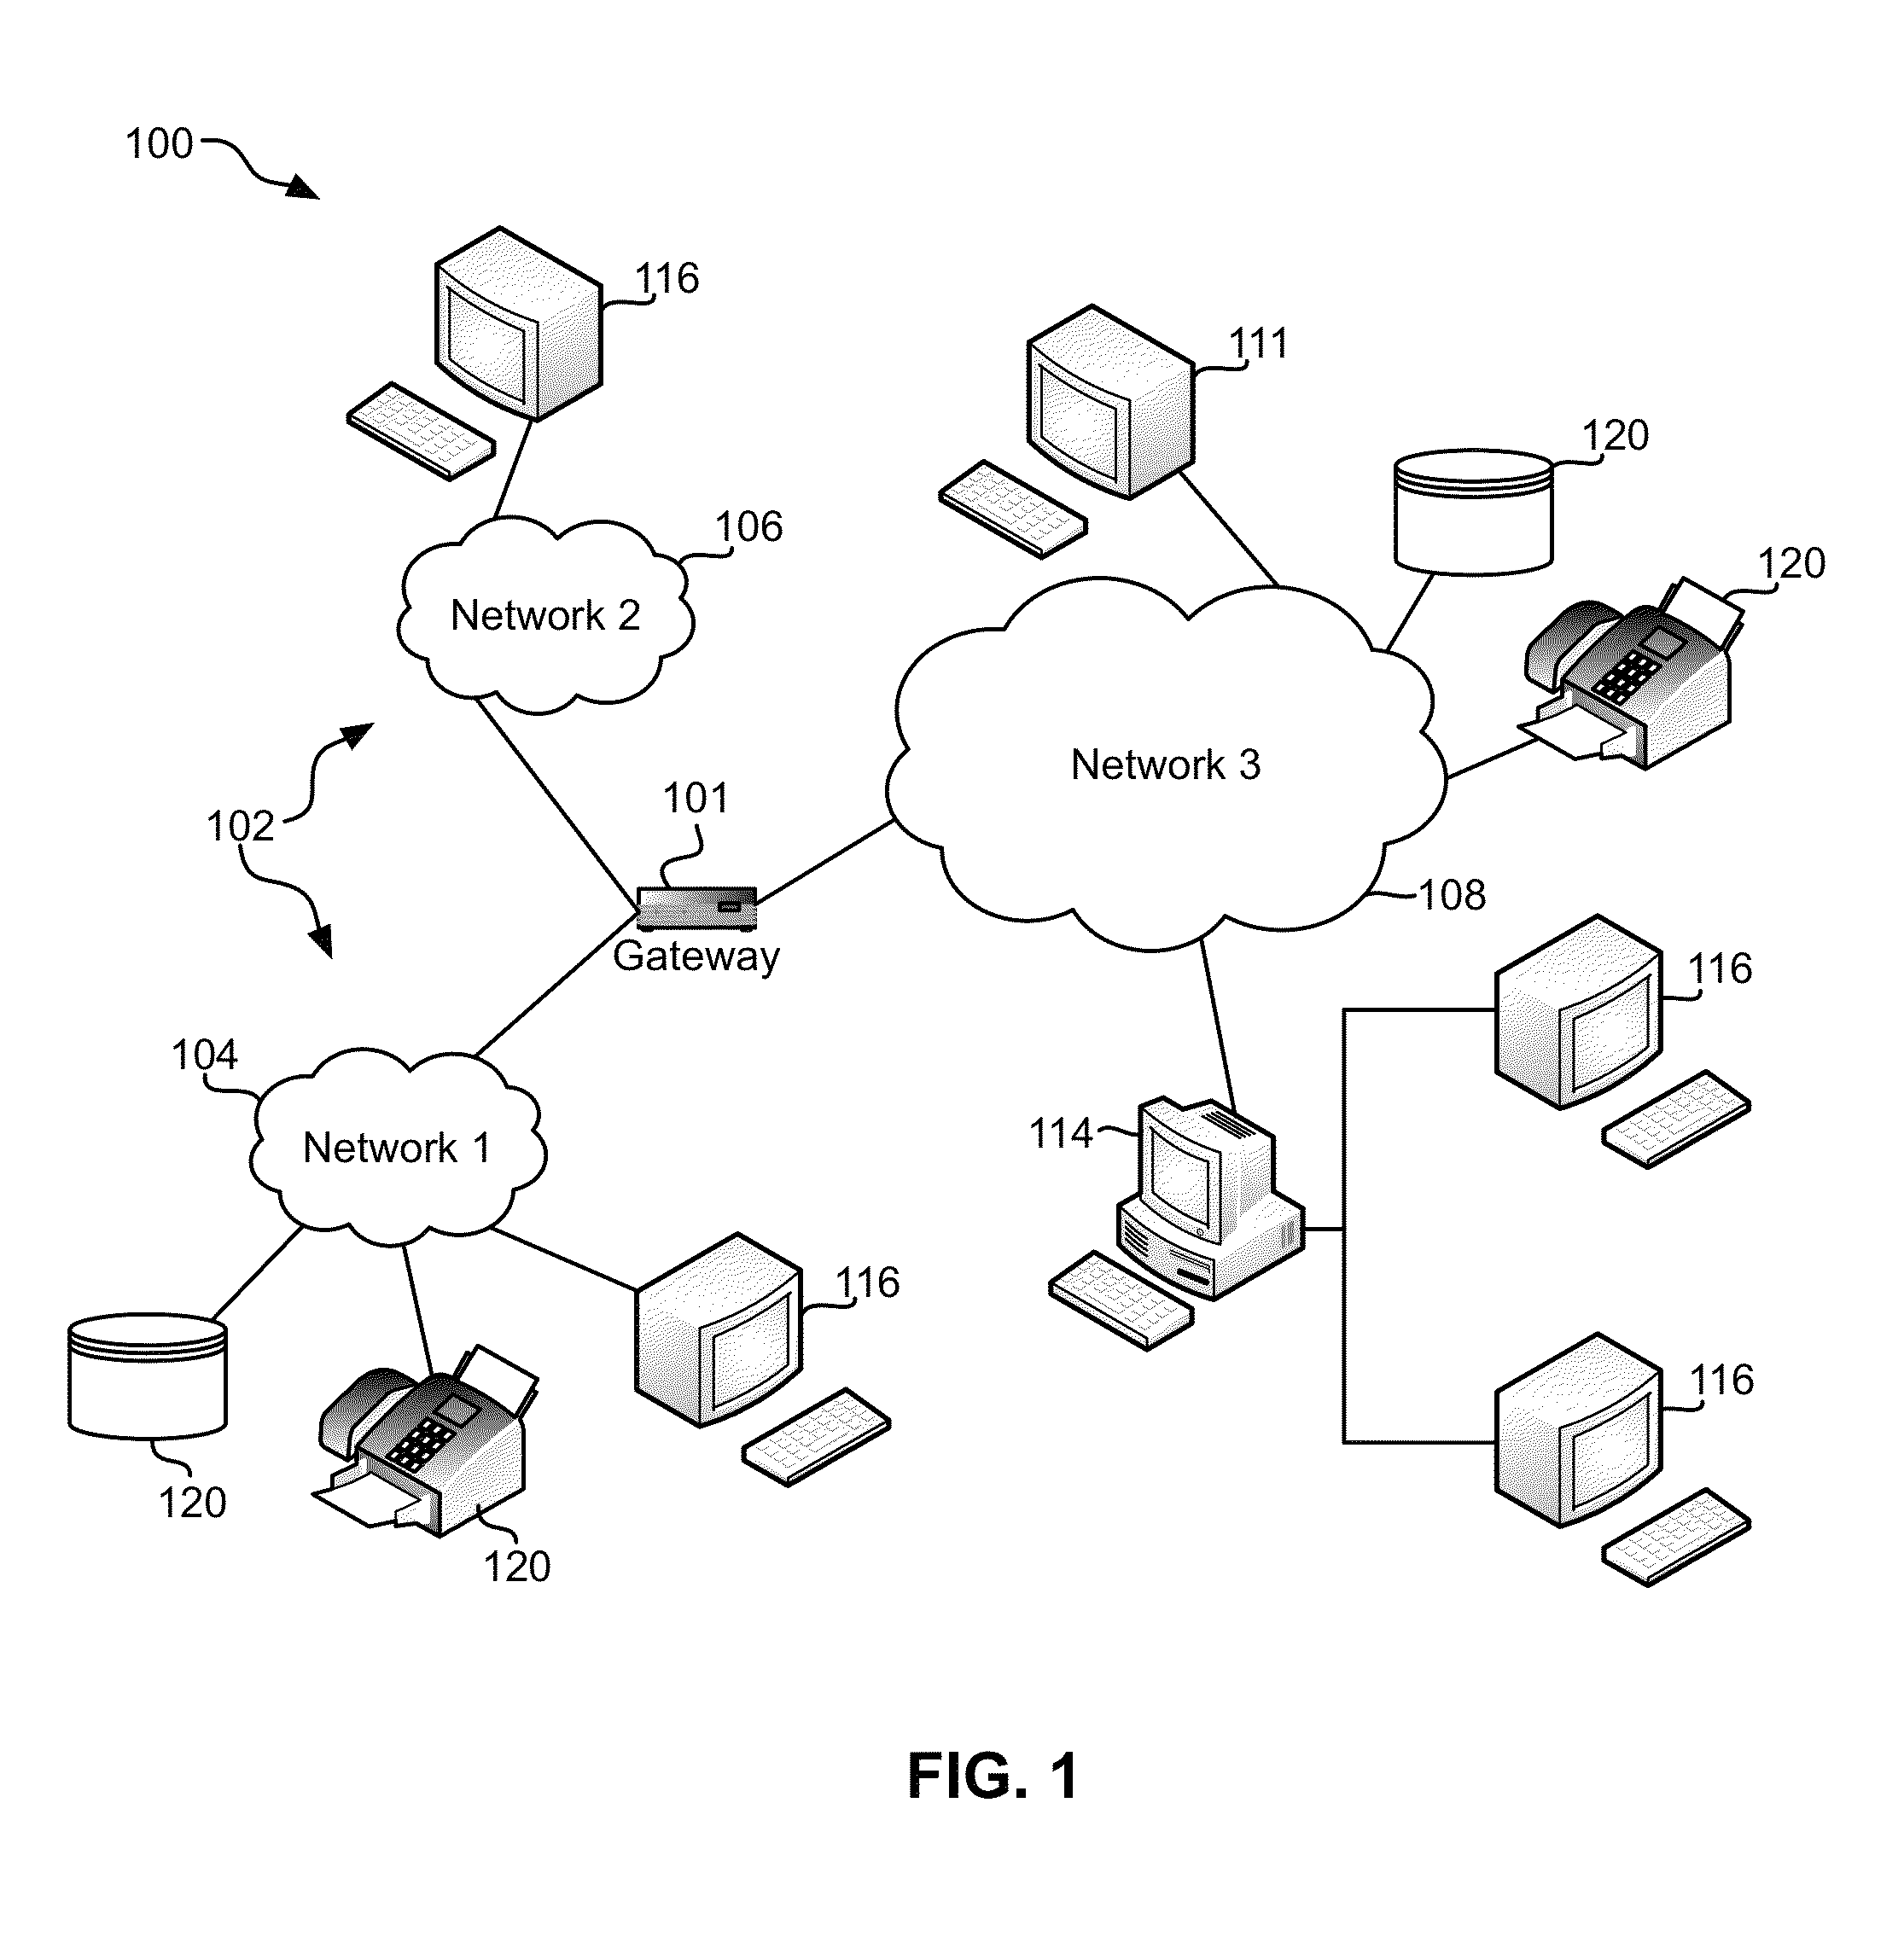 Systems for selectively enabling and disabling hardware features